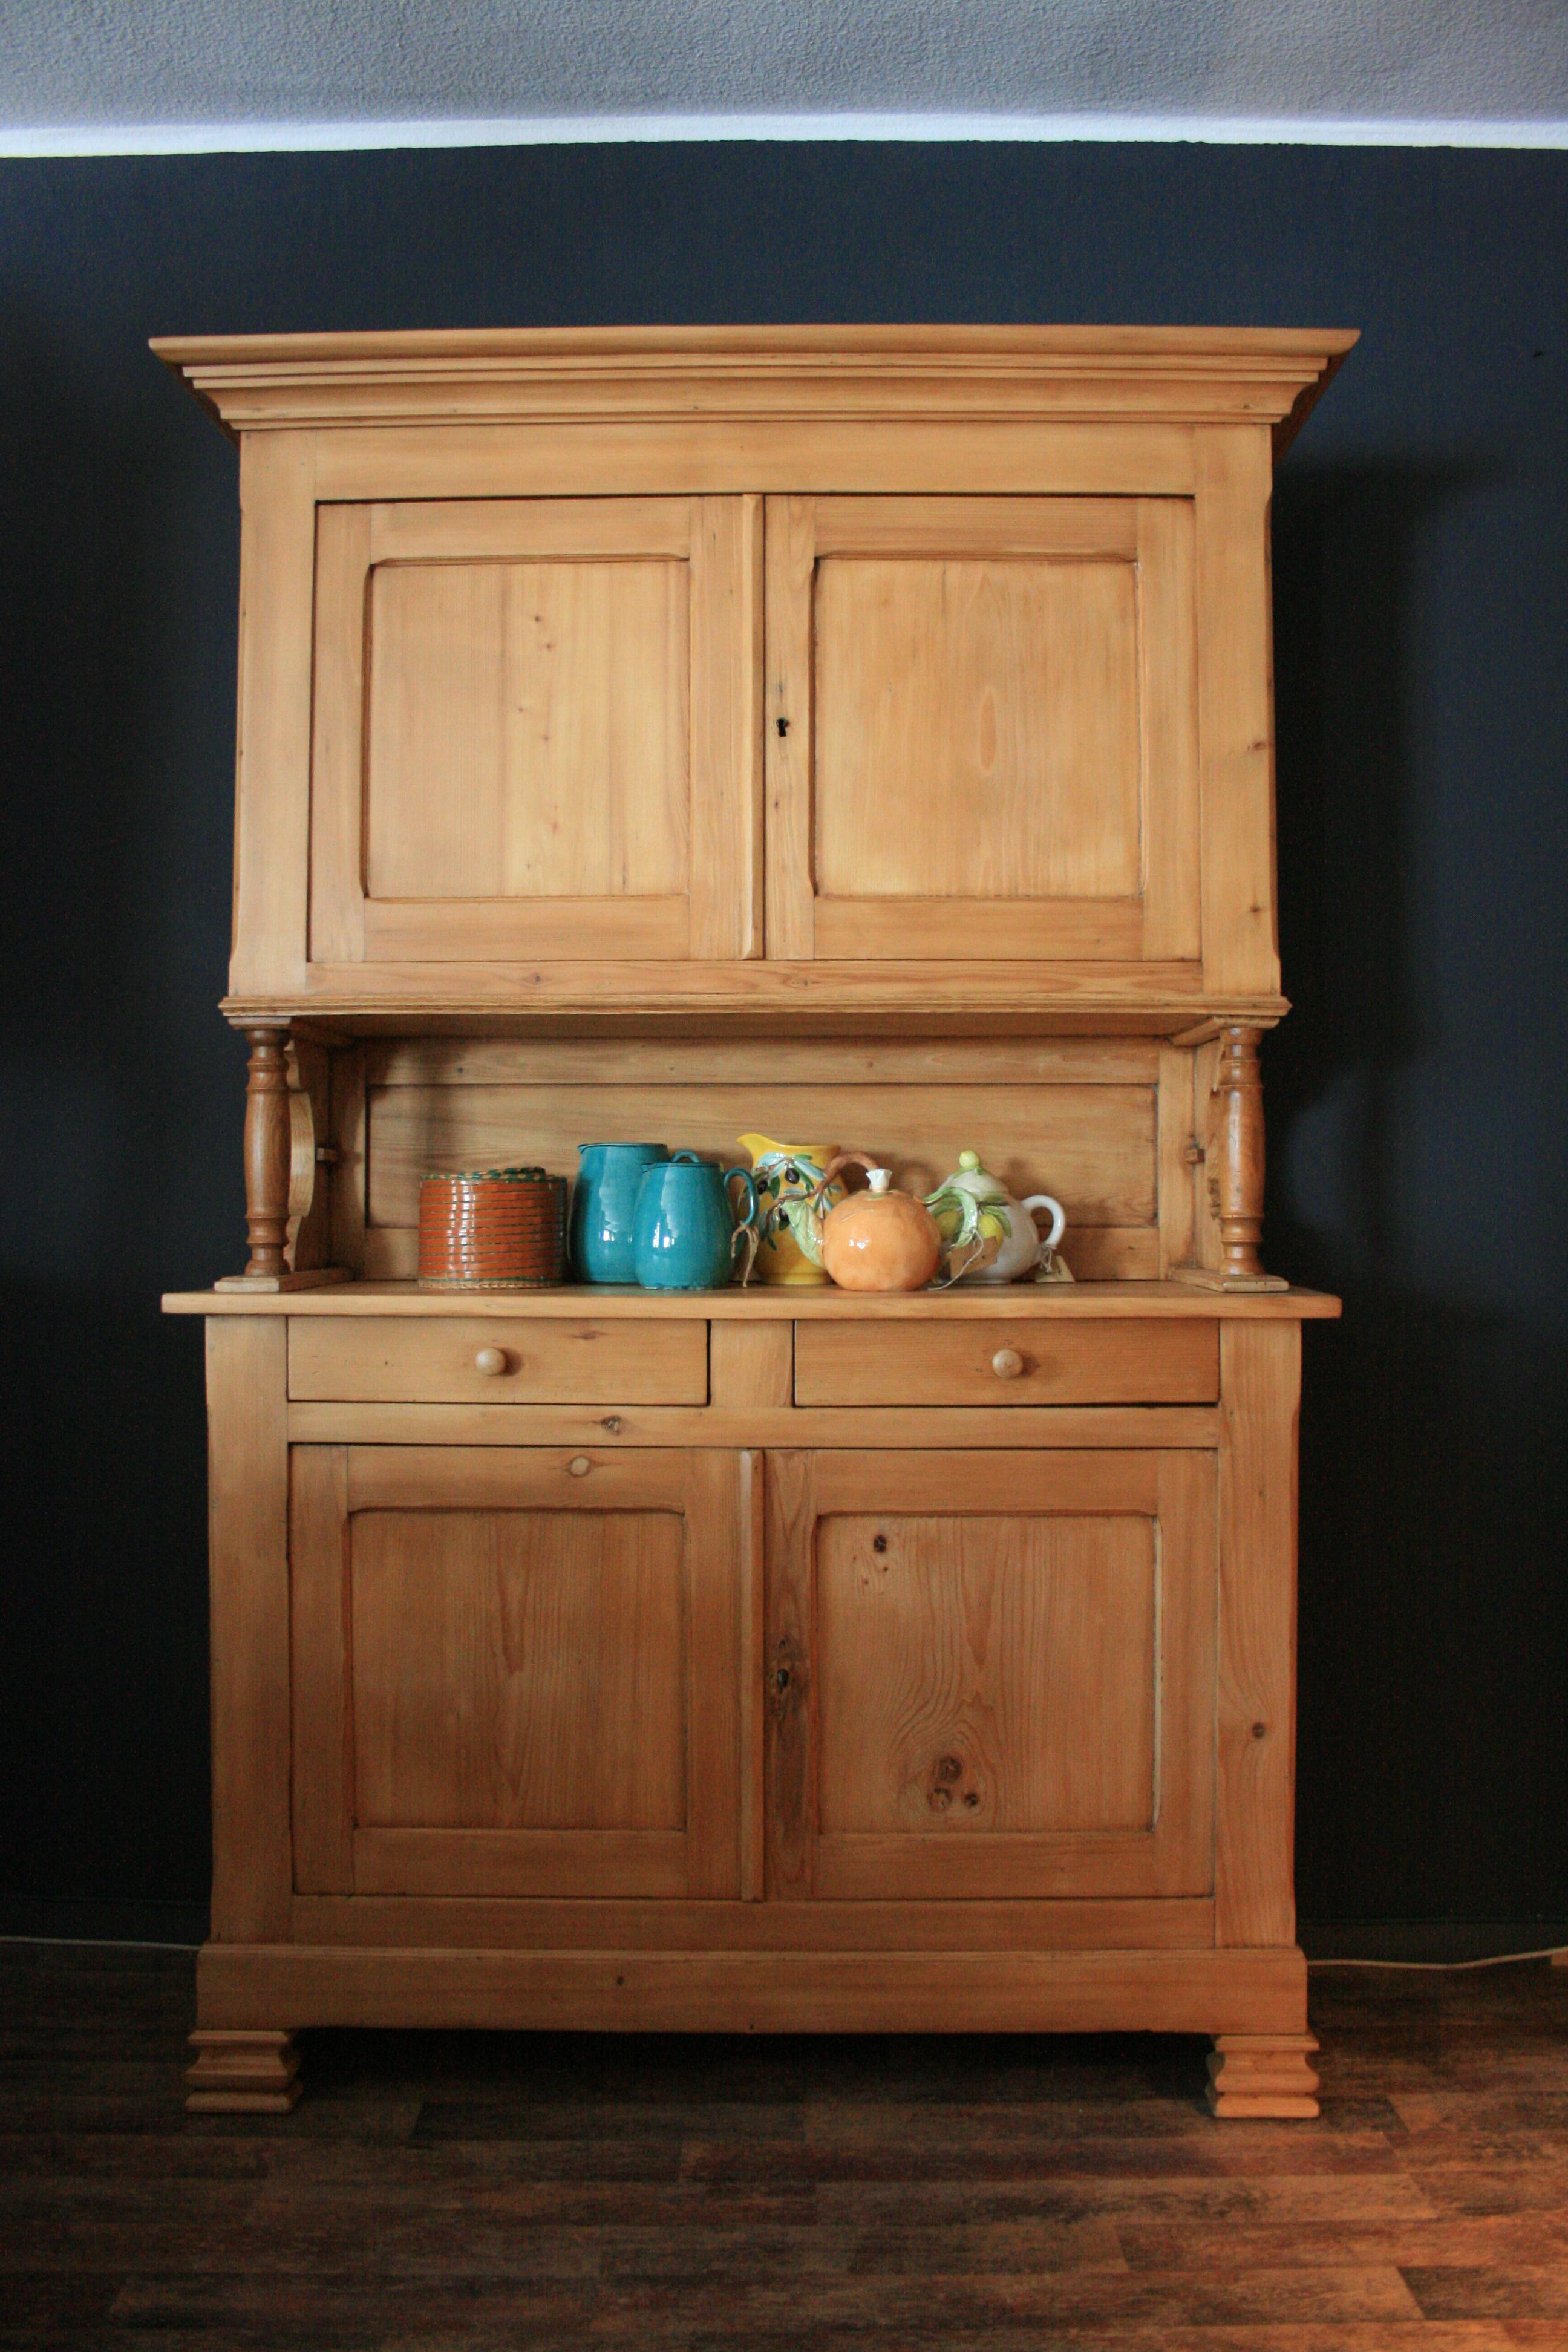 Large antique kitchen buffet made of pine, circa 1880. Completely restored. Two-part with turned columns in the middle.
The cabinet provides plenty of storage space behind the doors in the top and bottom for e.g. Pans and pots, as well as for